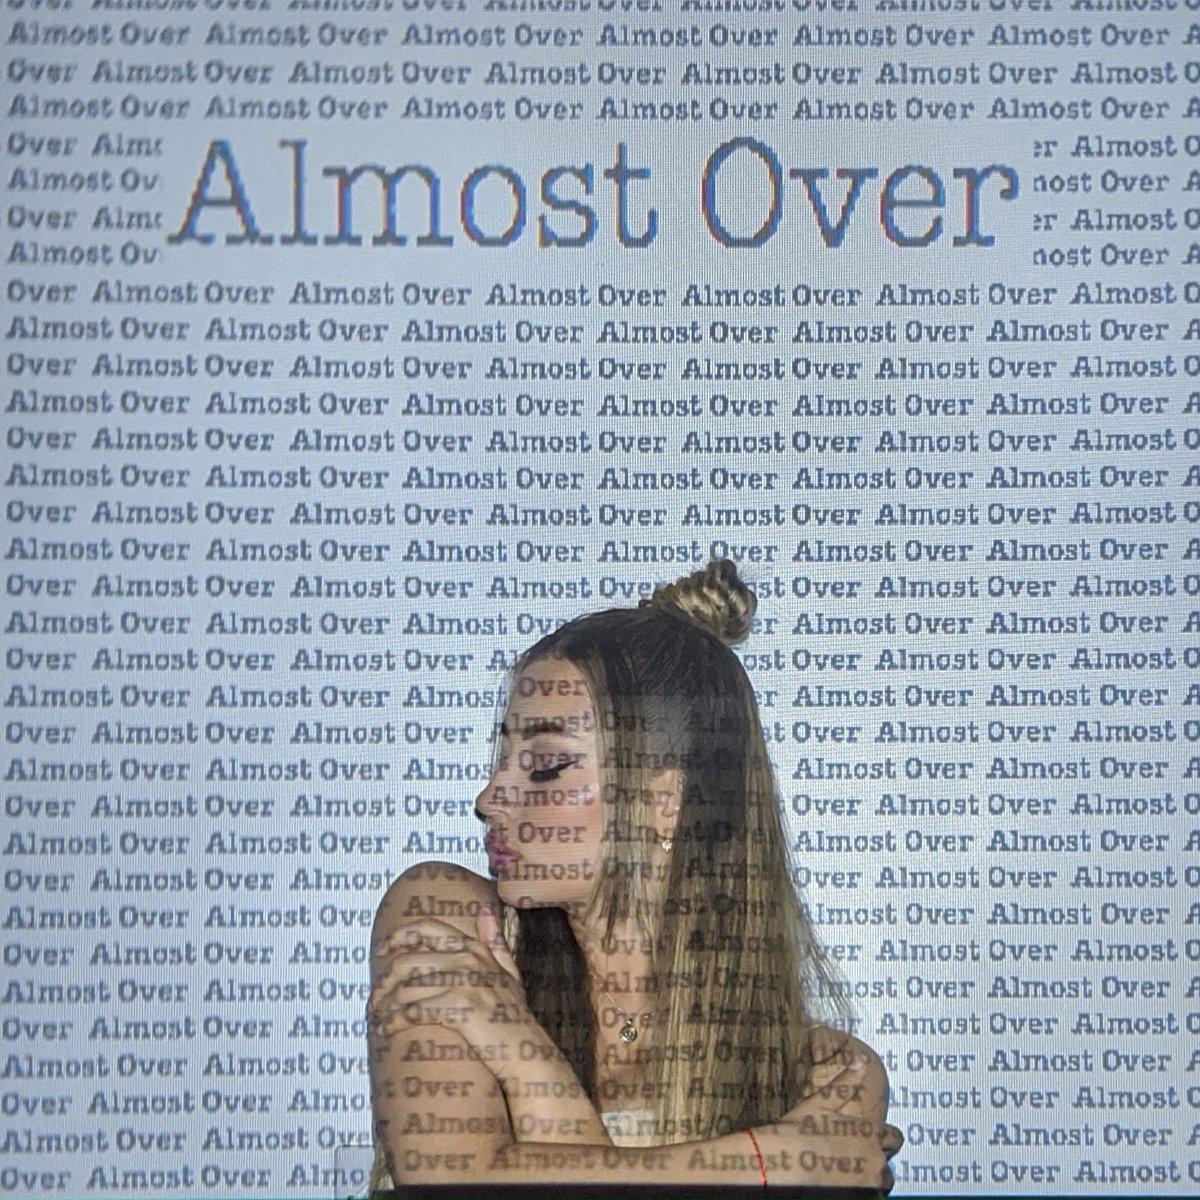 South London-native @CheskaMoore_ has left us with chills running down our spines with her haunting new singer/songwriter release, “Almost Over.” Check it out, Gas Maskers: bit.ly/2ANKeEm